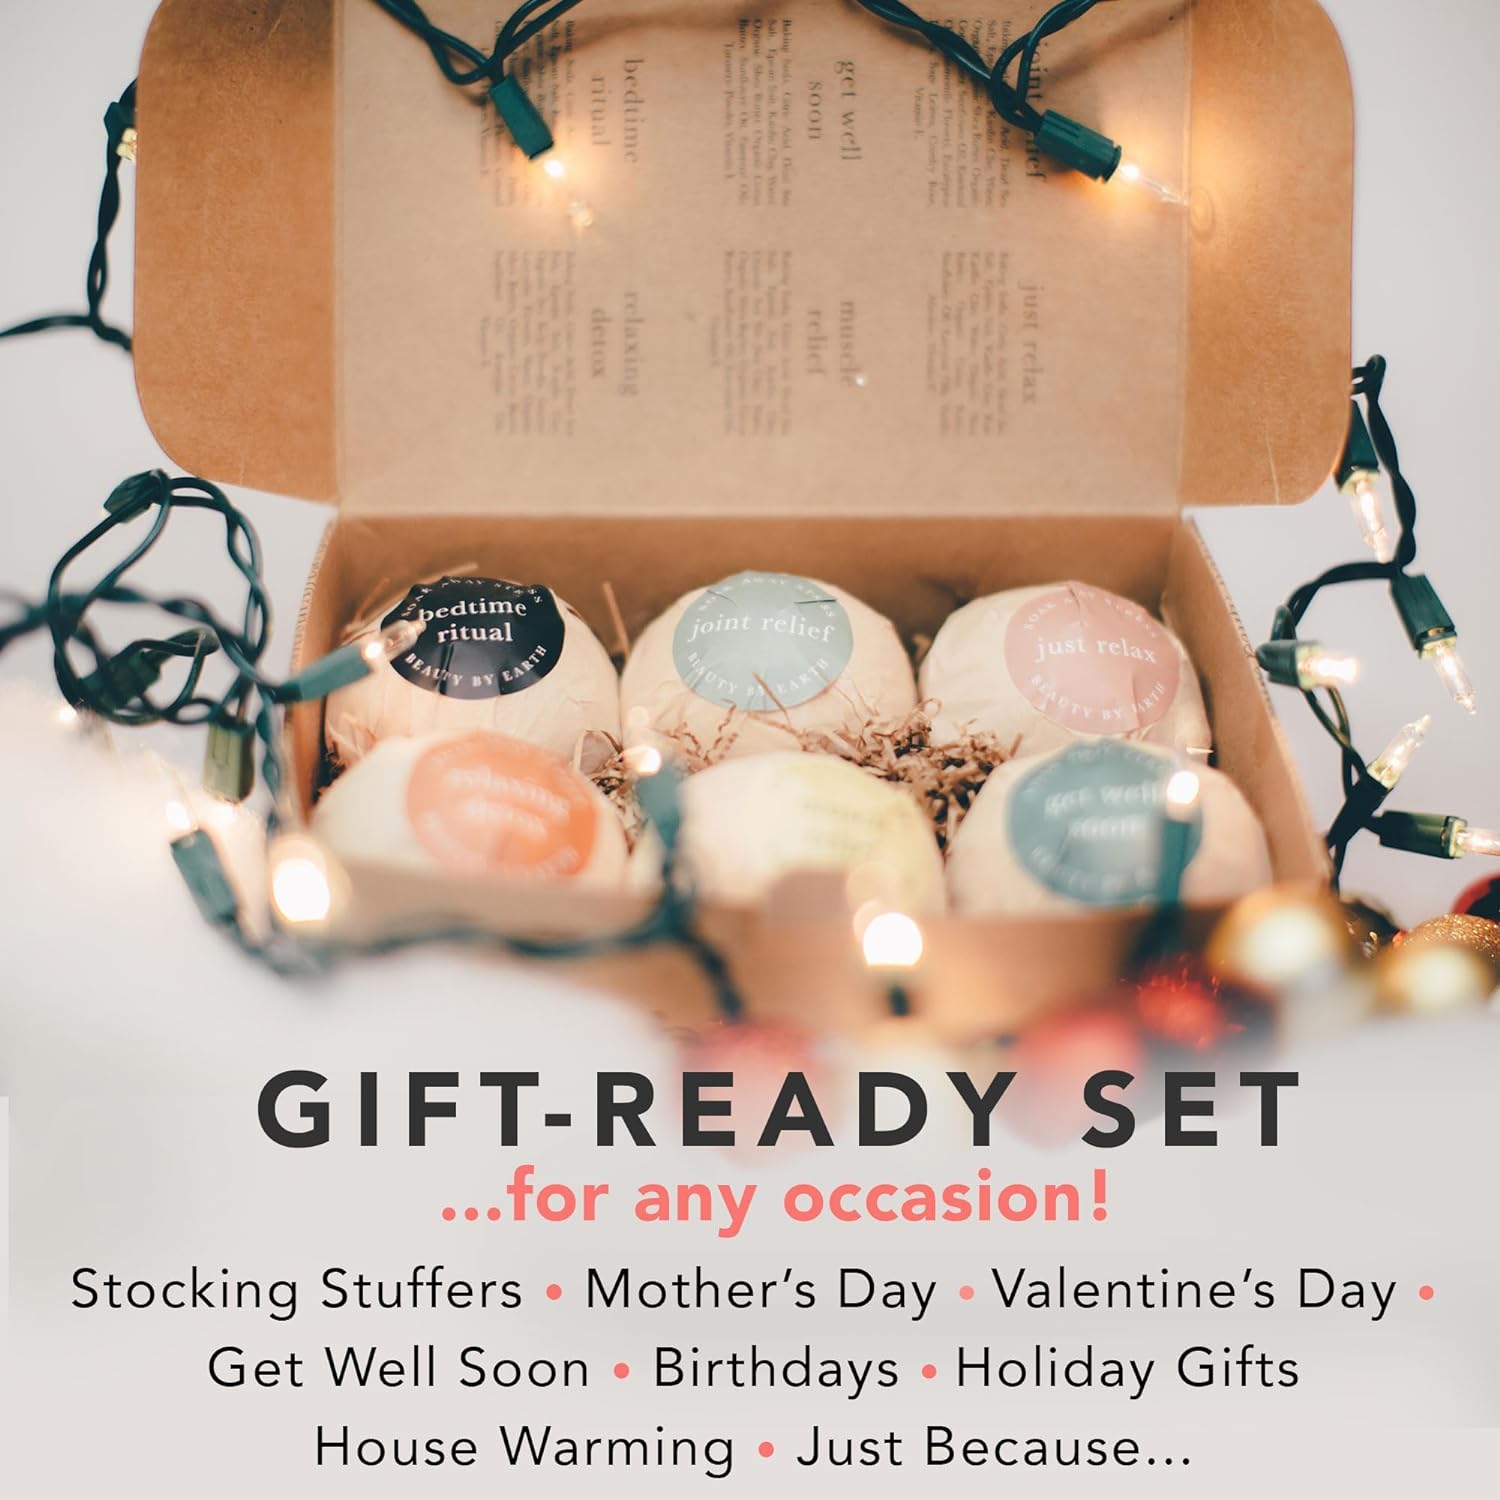 Bath Bomb Gift Set - USA Made with Natural & Organic Ingredients, Mothers Day Gifts, Relaxing Gifts for Women & Men, Spa Gifts & Birthday Gifts for Women and Mom, Bath Bombs for Women Gift Ideas : Beauty & Personal Care